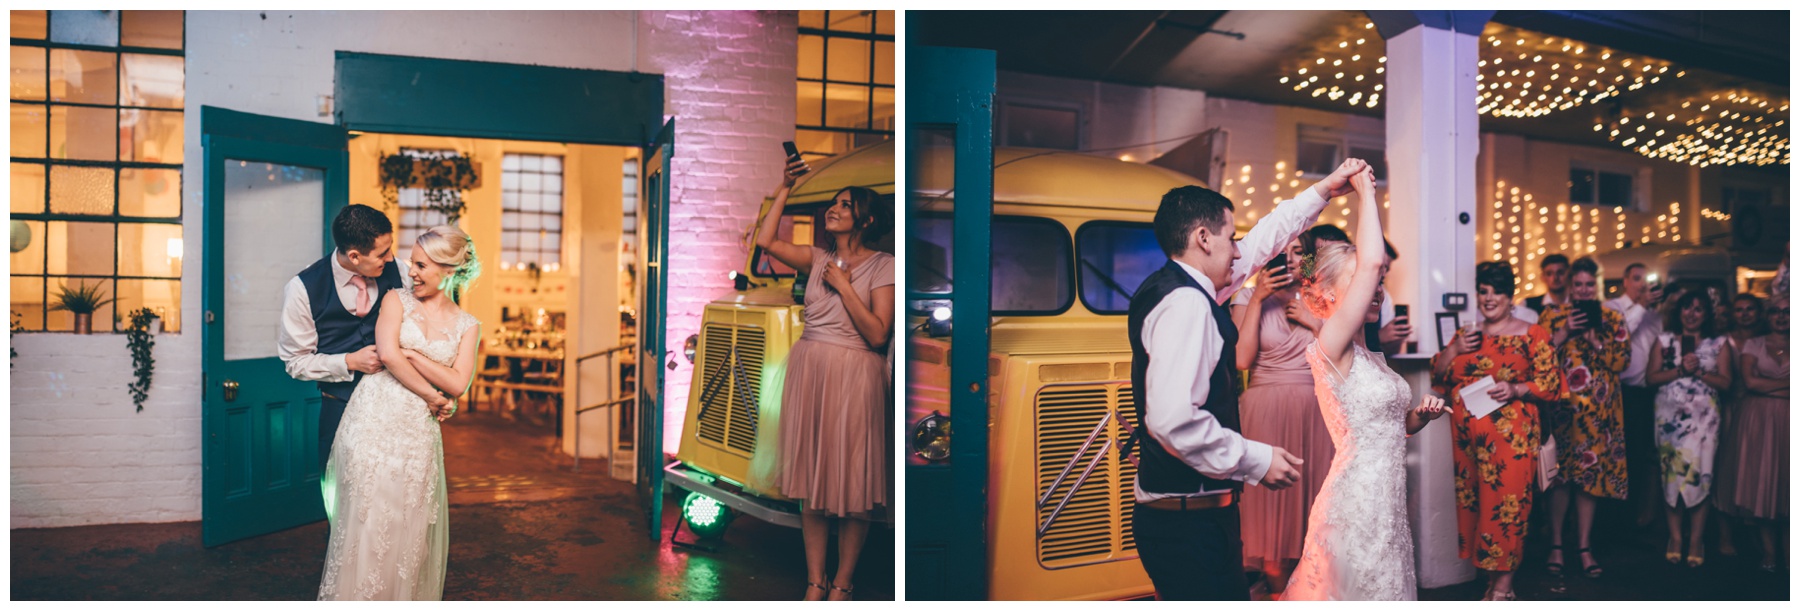 Bride and groom enjoy their First Dance at The Hide in Sheffield.